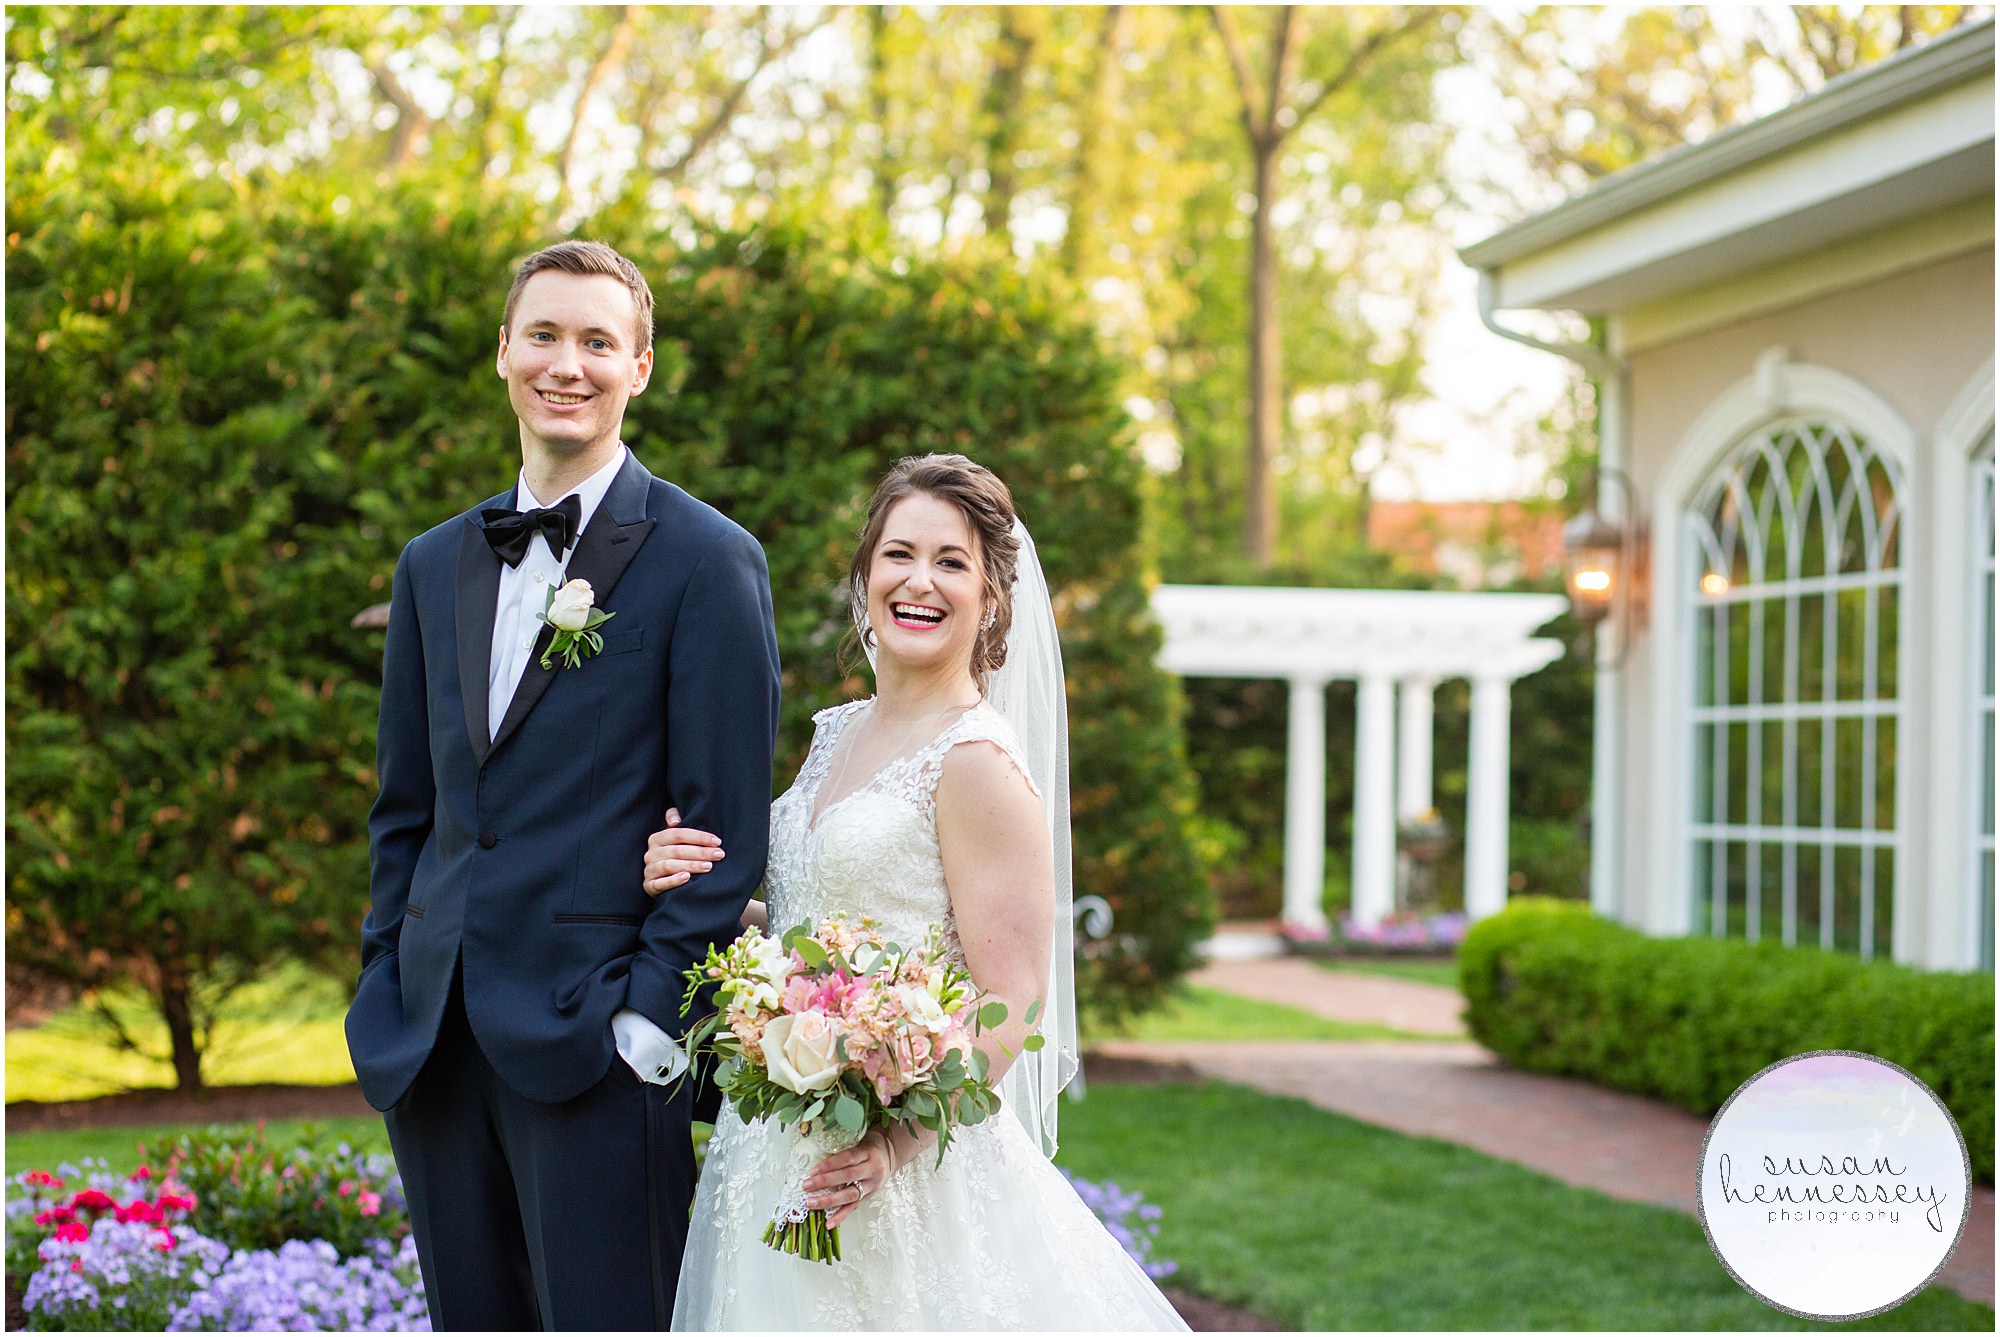 Classic spring wedding in South Jersey